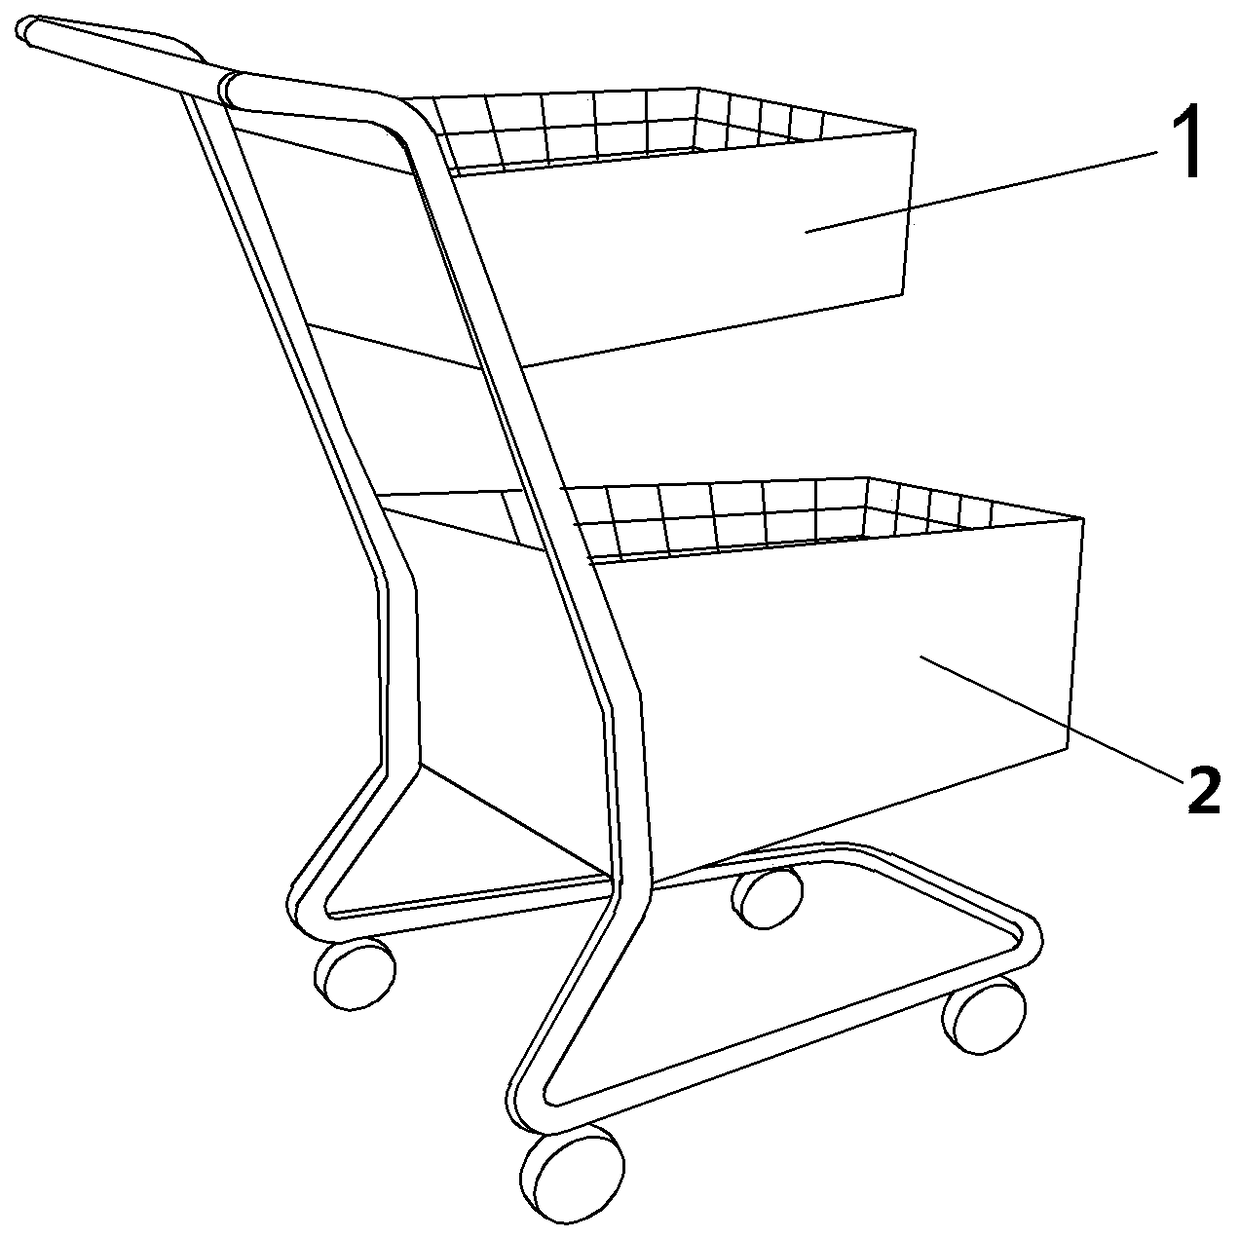 Double-layer shopping cart